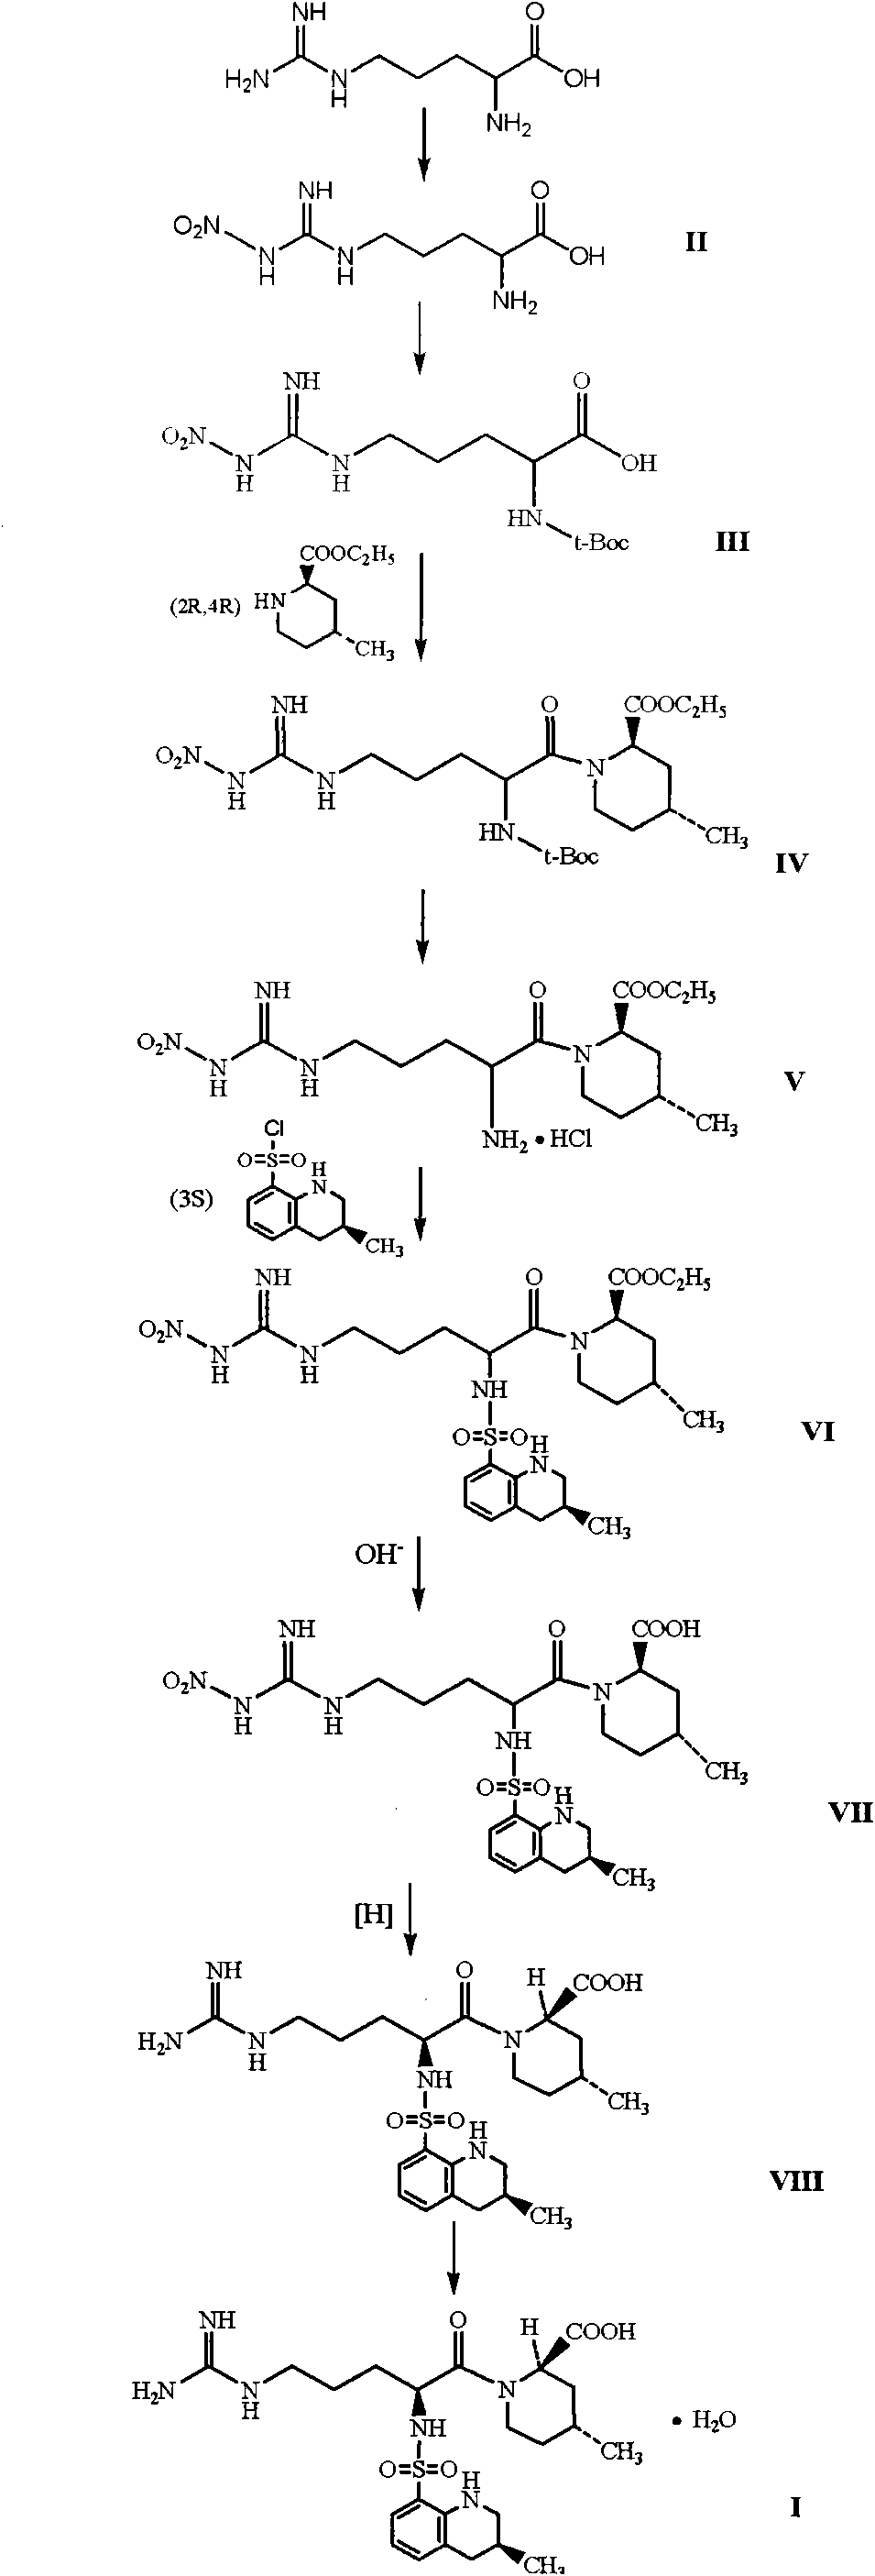 Directional synthesis method for 21(S) argatroban